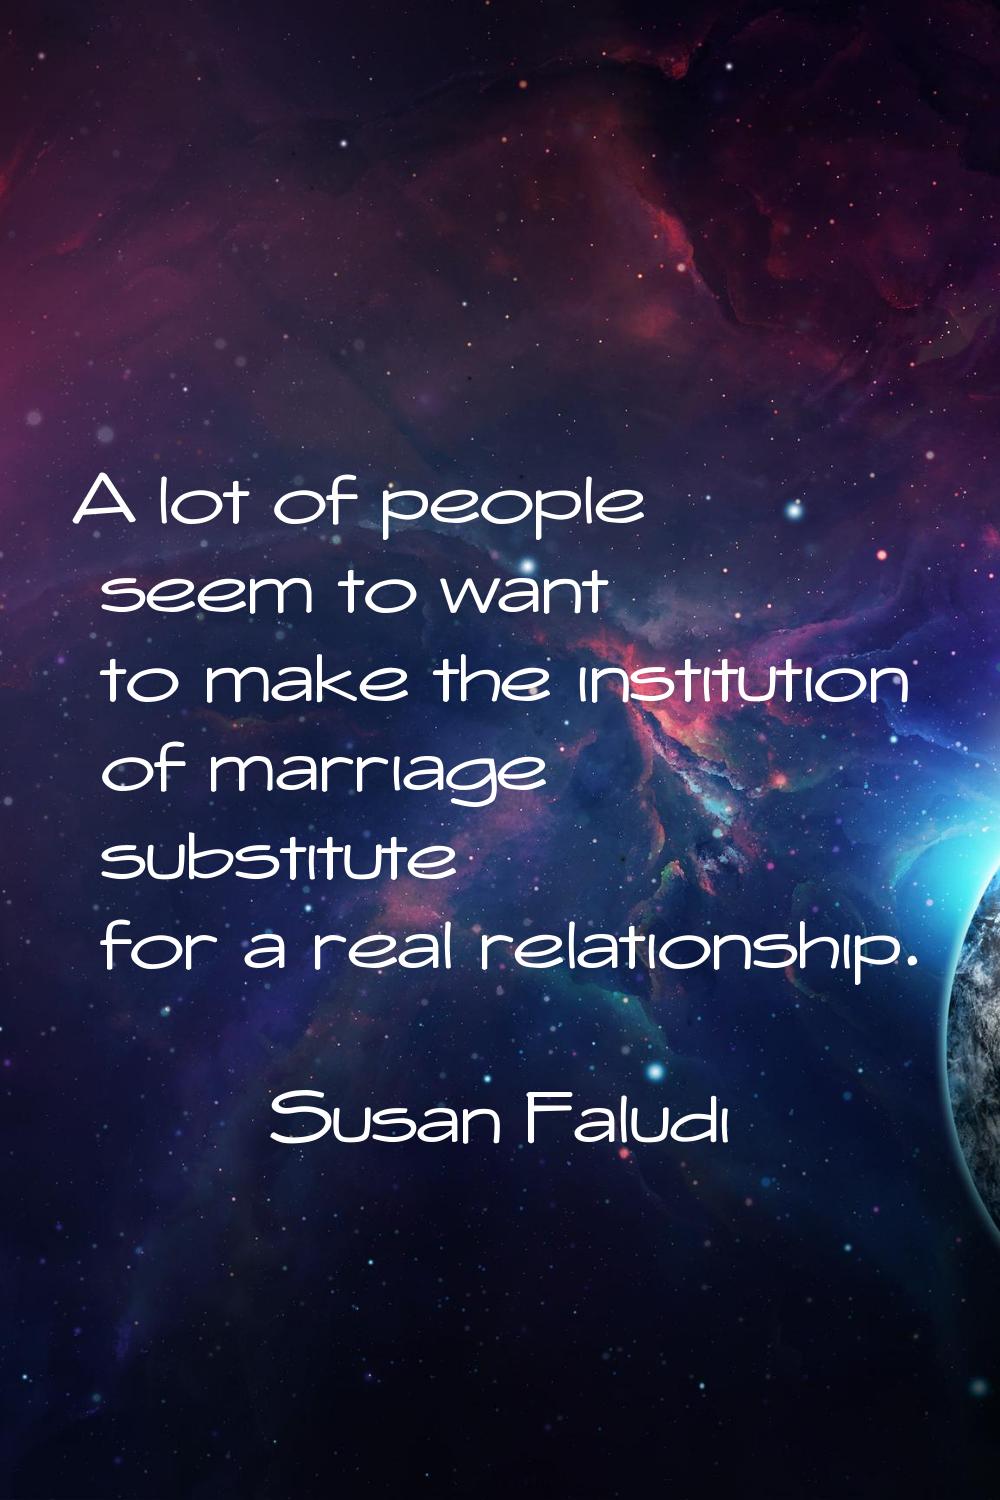 A lot of people seem to want to make the institution of marriage substitute for a real relationship